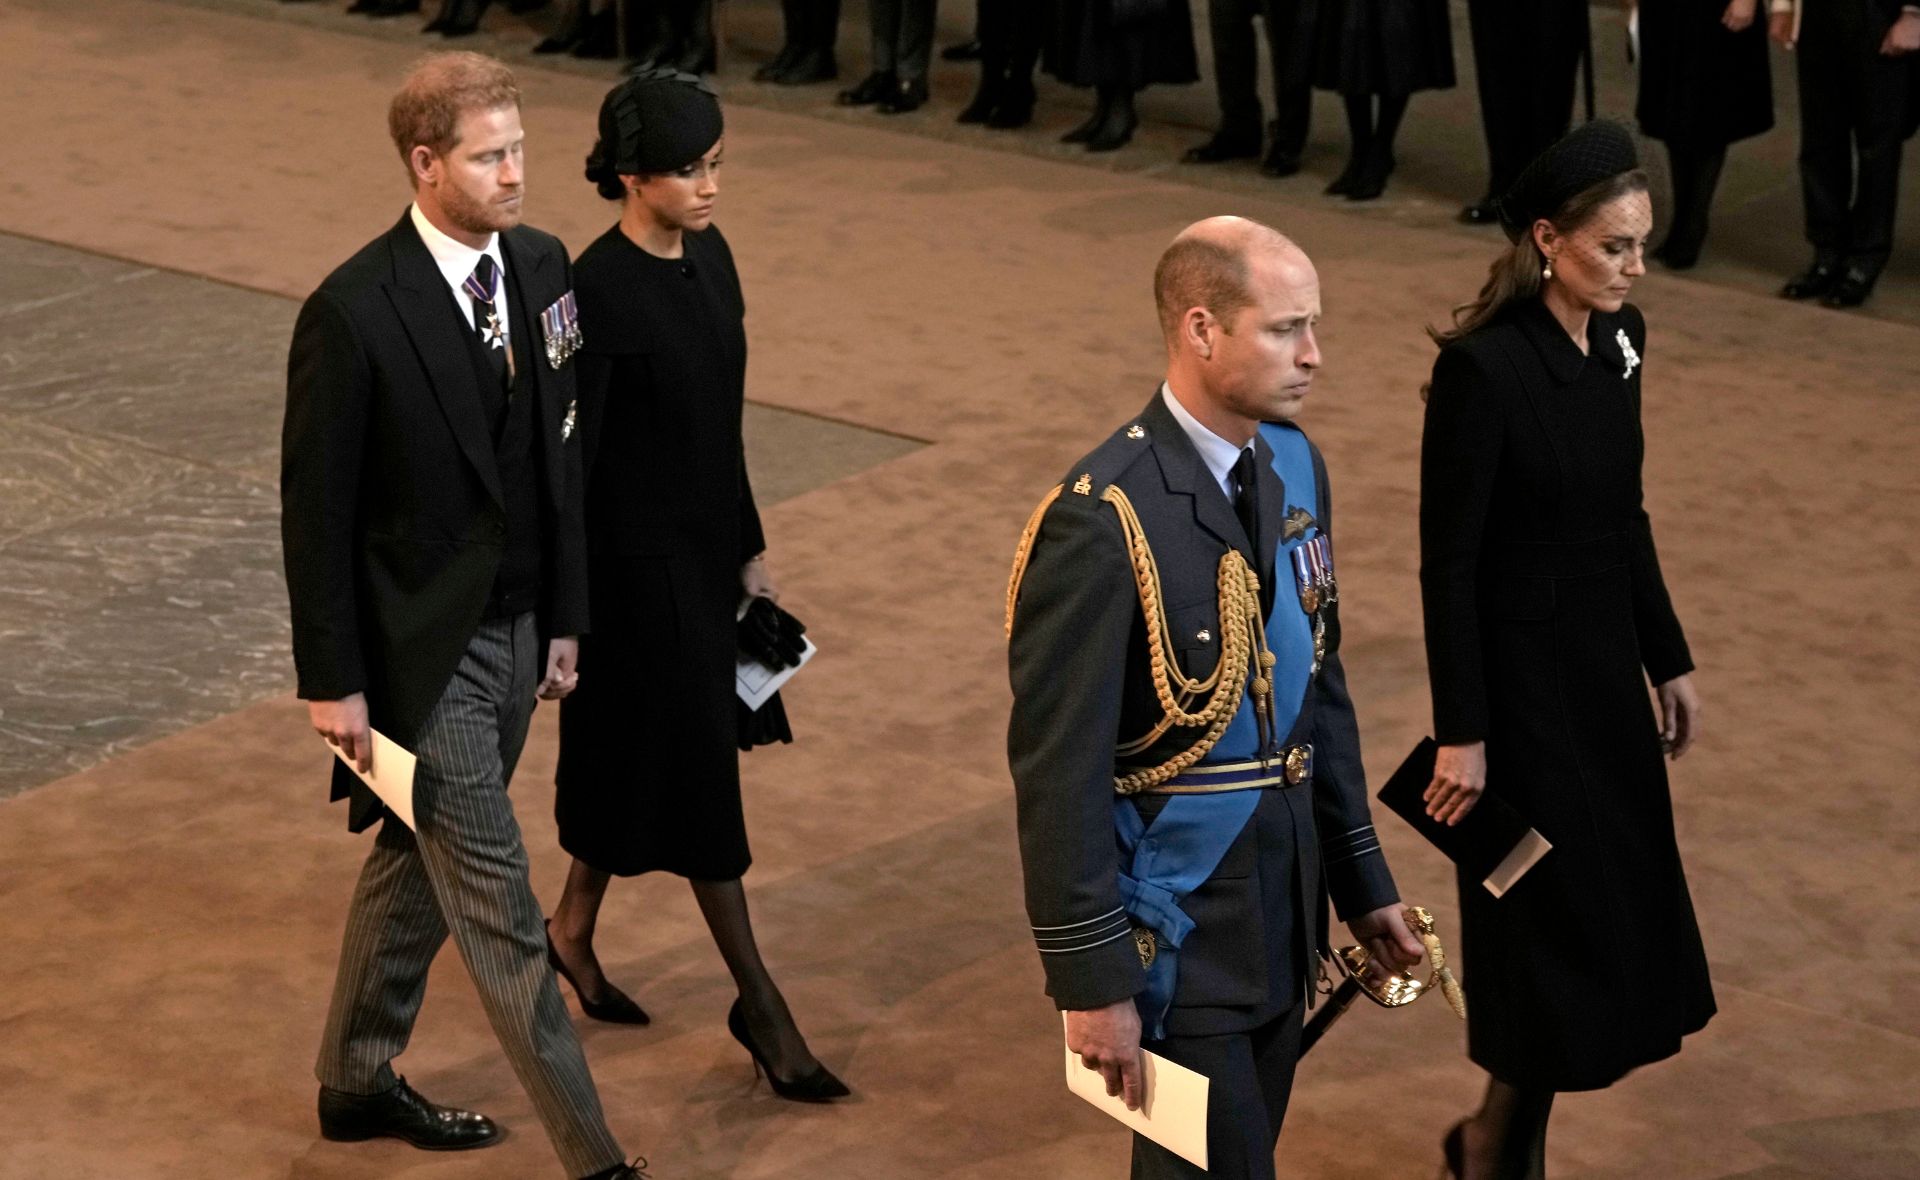 Prince Harry and Meghan Markle reunite with the British royal family to receive the Queen’s coffin